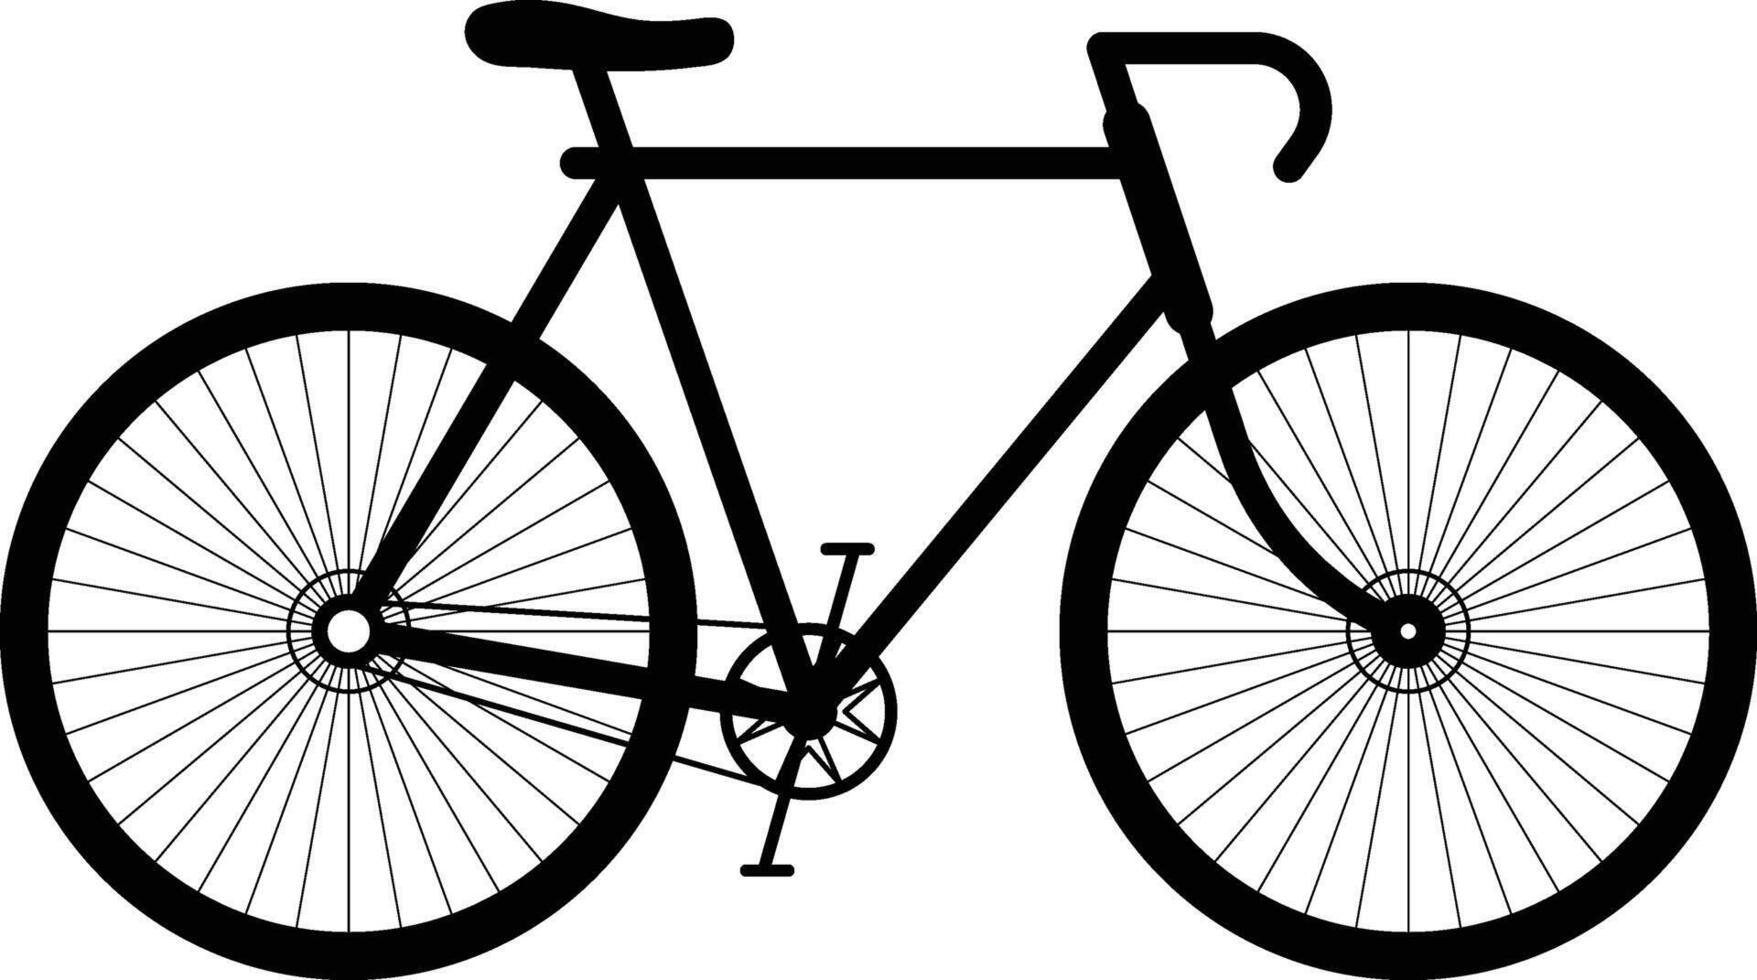 Racing Bicycle icon collection. Bicycle Silhouette icon isolated. vector